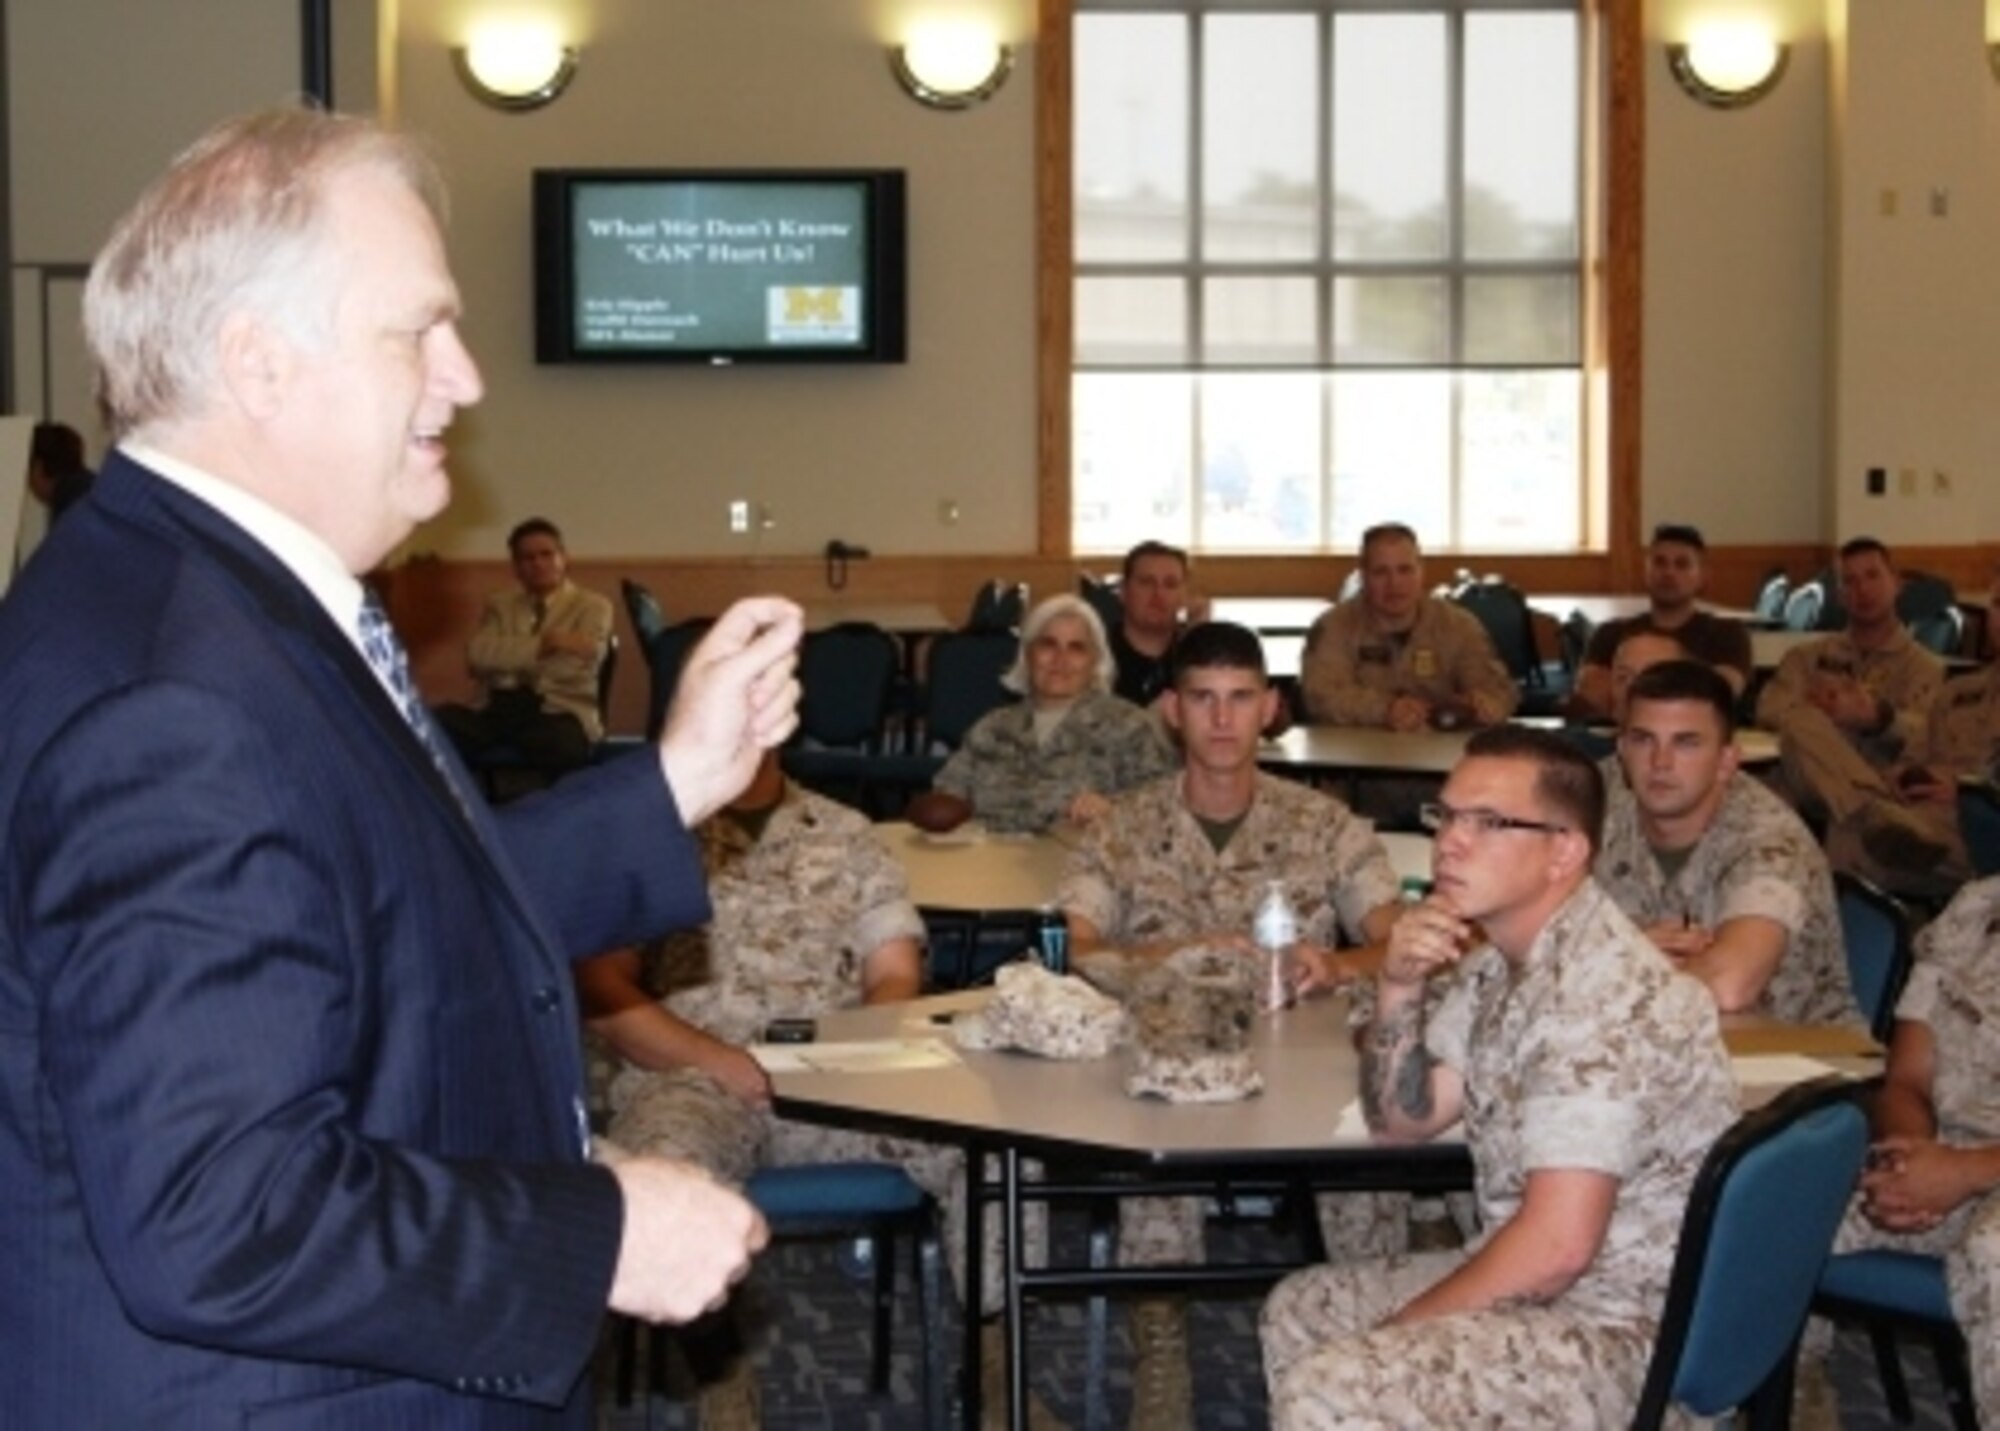 Eric Hipple, a former quarterback with the Detroit Lions, speaks with a group of military and Dept. of Homeland Security personnel, about suicide prevention during a seminar at Selfridge Air National Guard Base, Mich., Sept. 21, 2011. Hipple works with the University of Michigan to help create awareness about depression-related illness. (U.S. Air Force photo by TSgt. Dan Heaton)